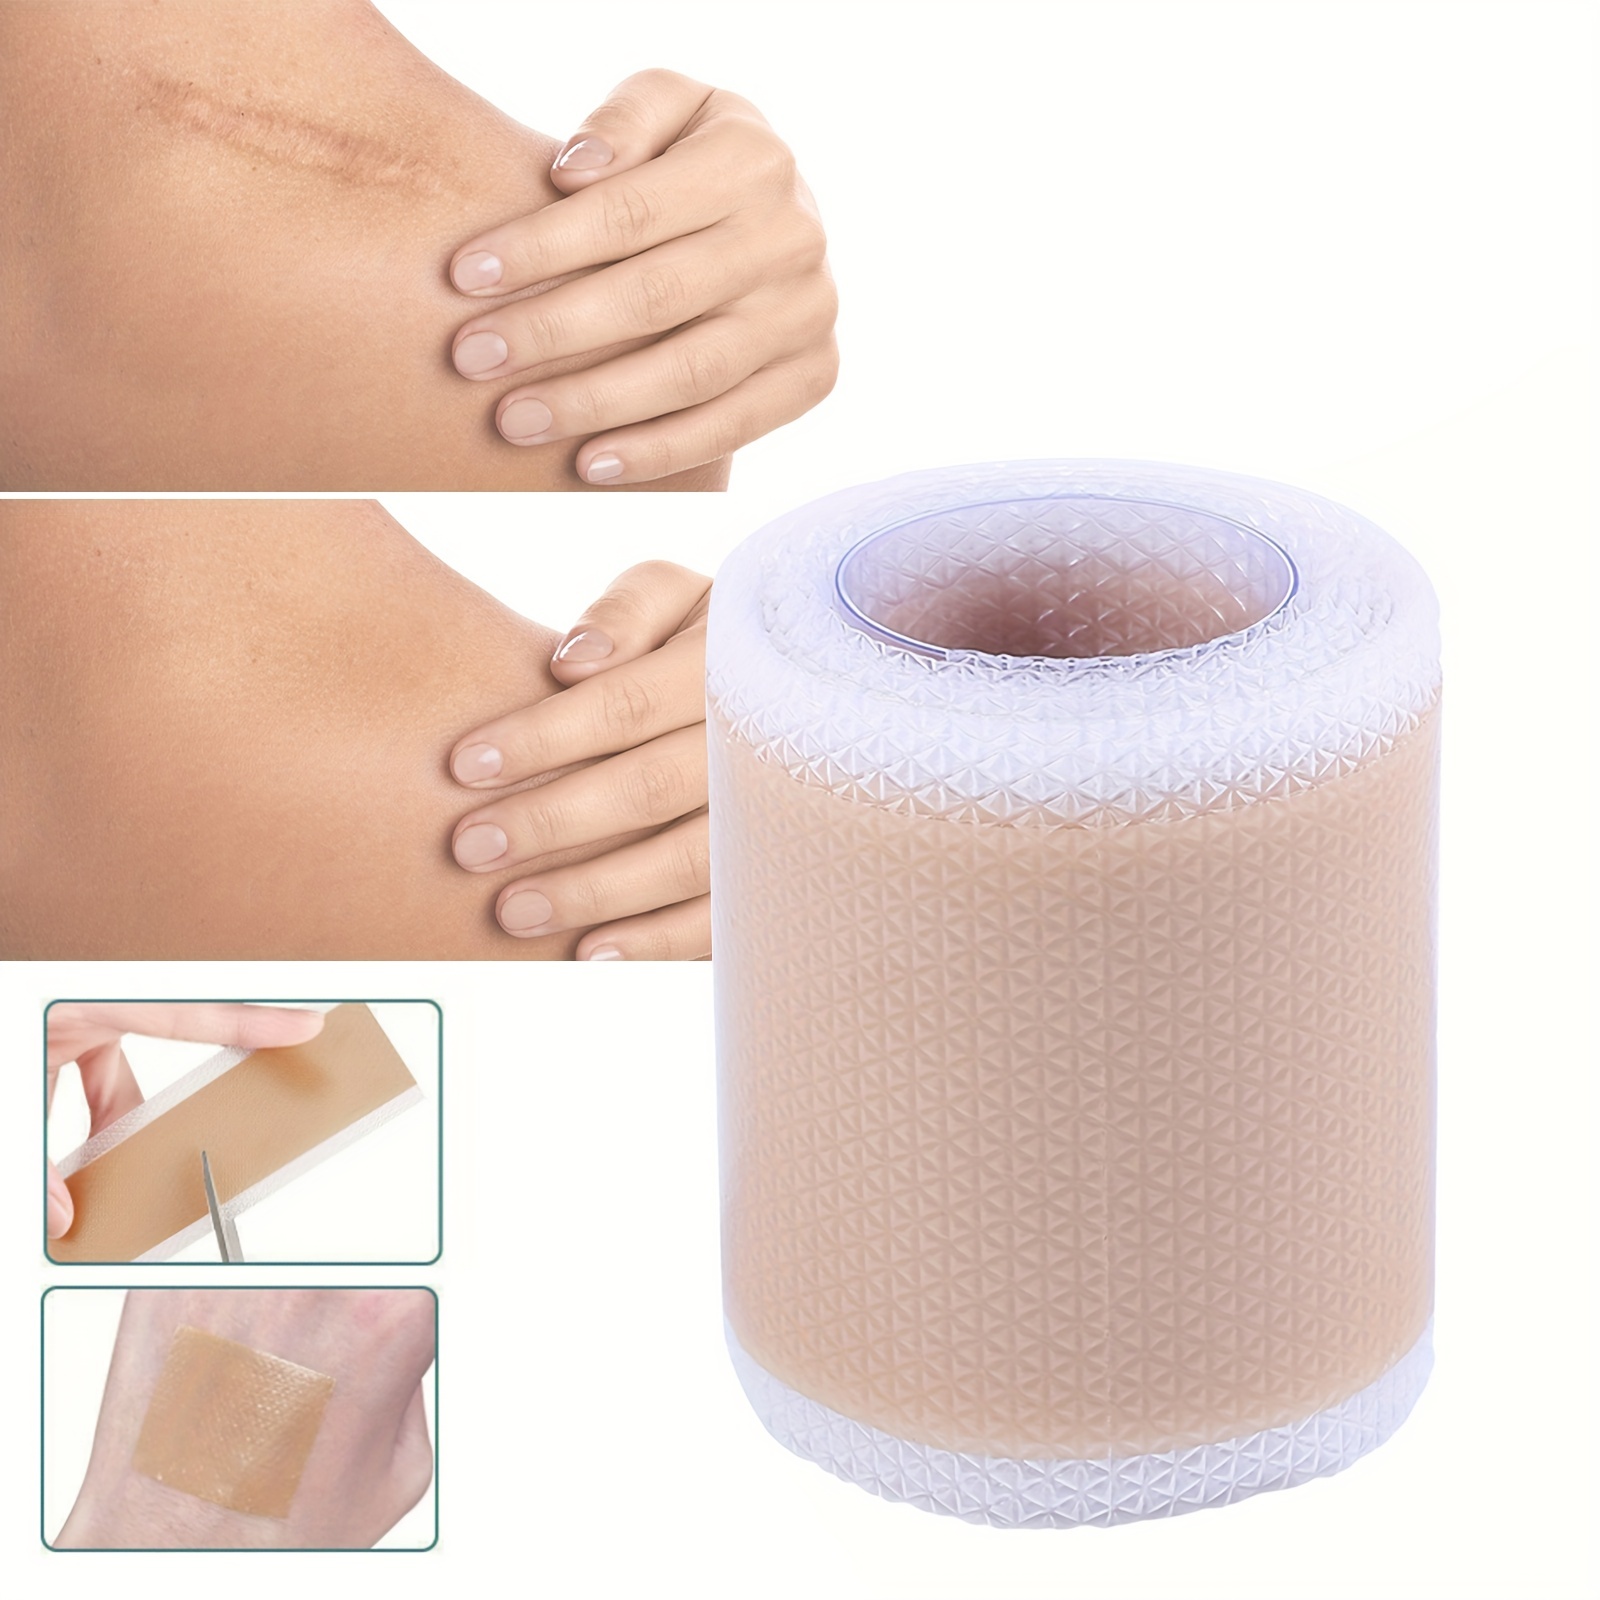 

Invisible Silicone Gel Scar Tape Roll - 4cm X 150cm - Skin Color - Effectively Reduce Scars And Stretch Marks